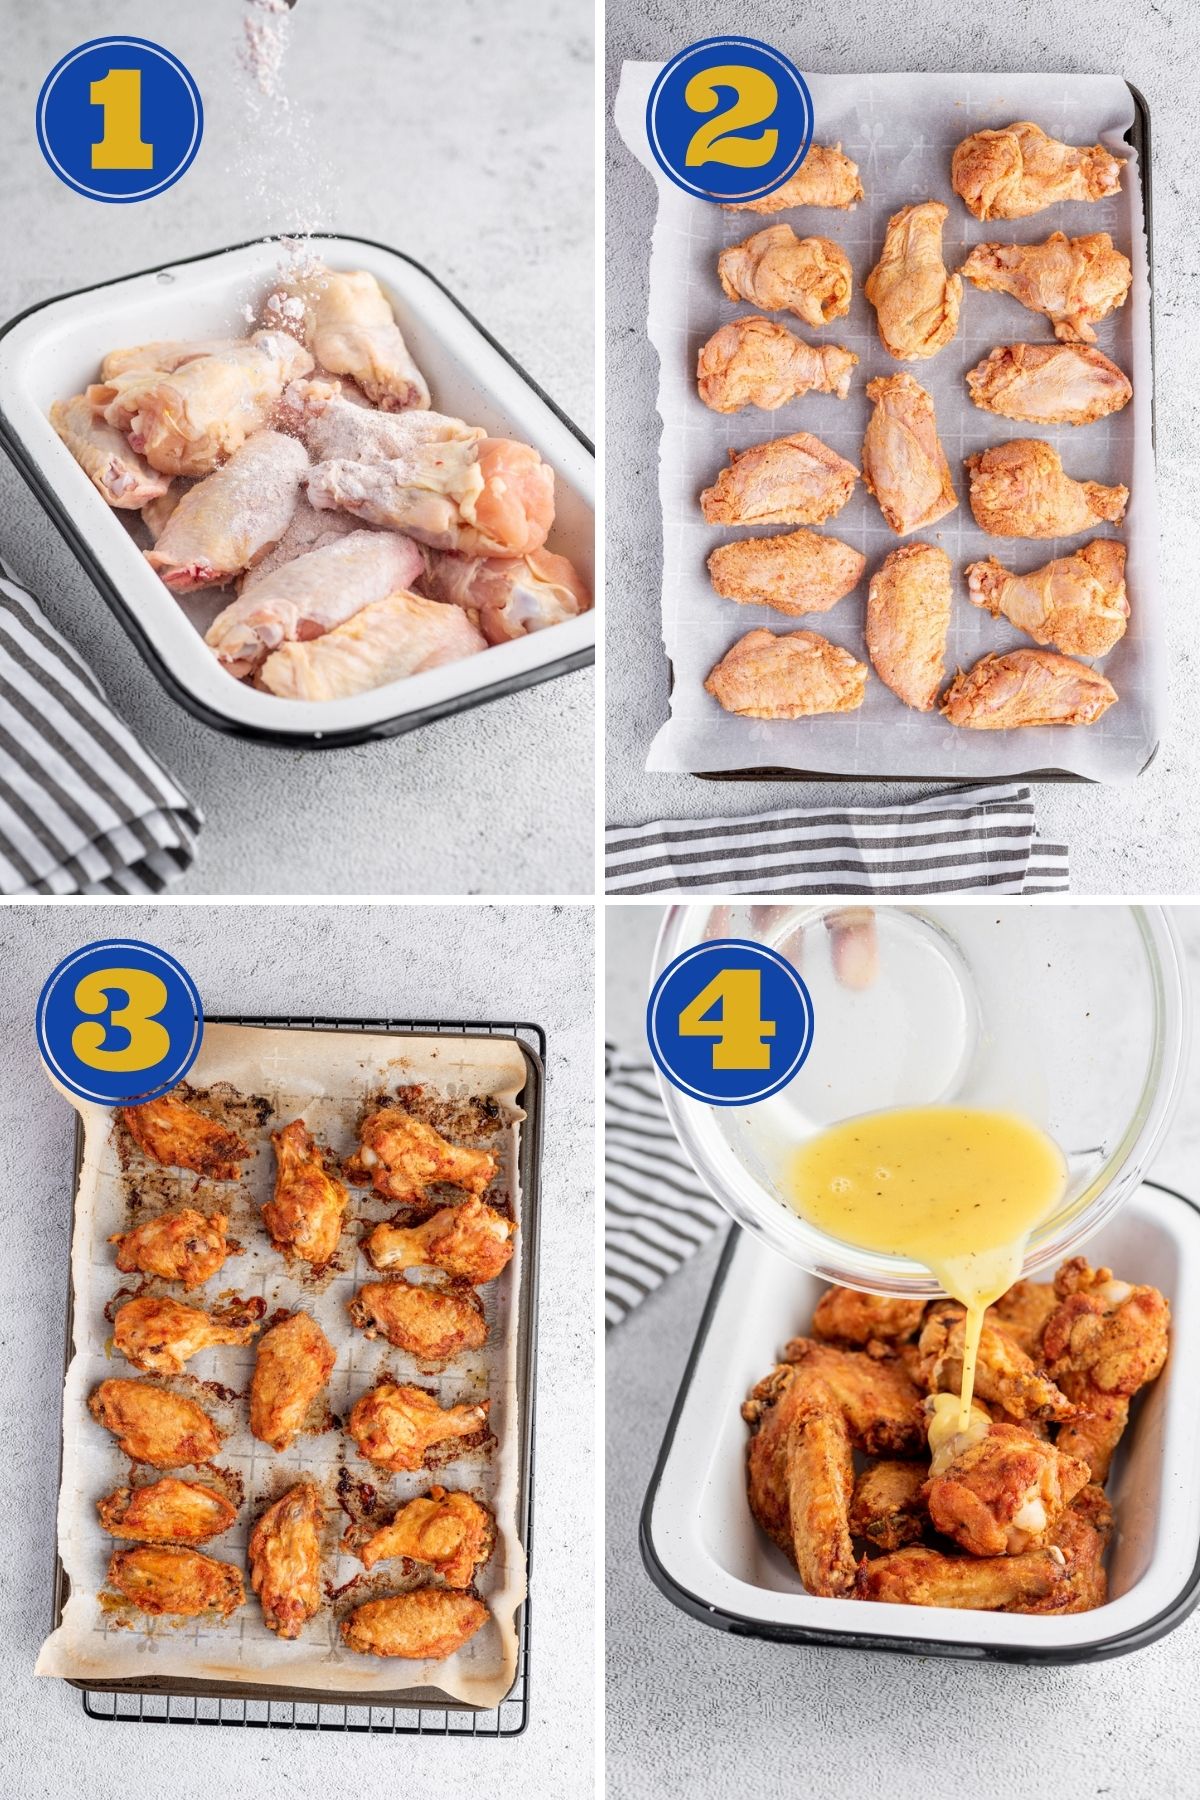 step-by-step instructions for how to make Baked Lemon Pepper Chicken Wings